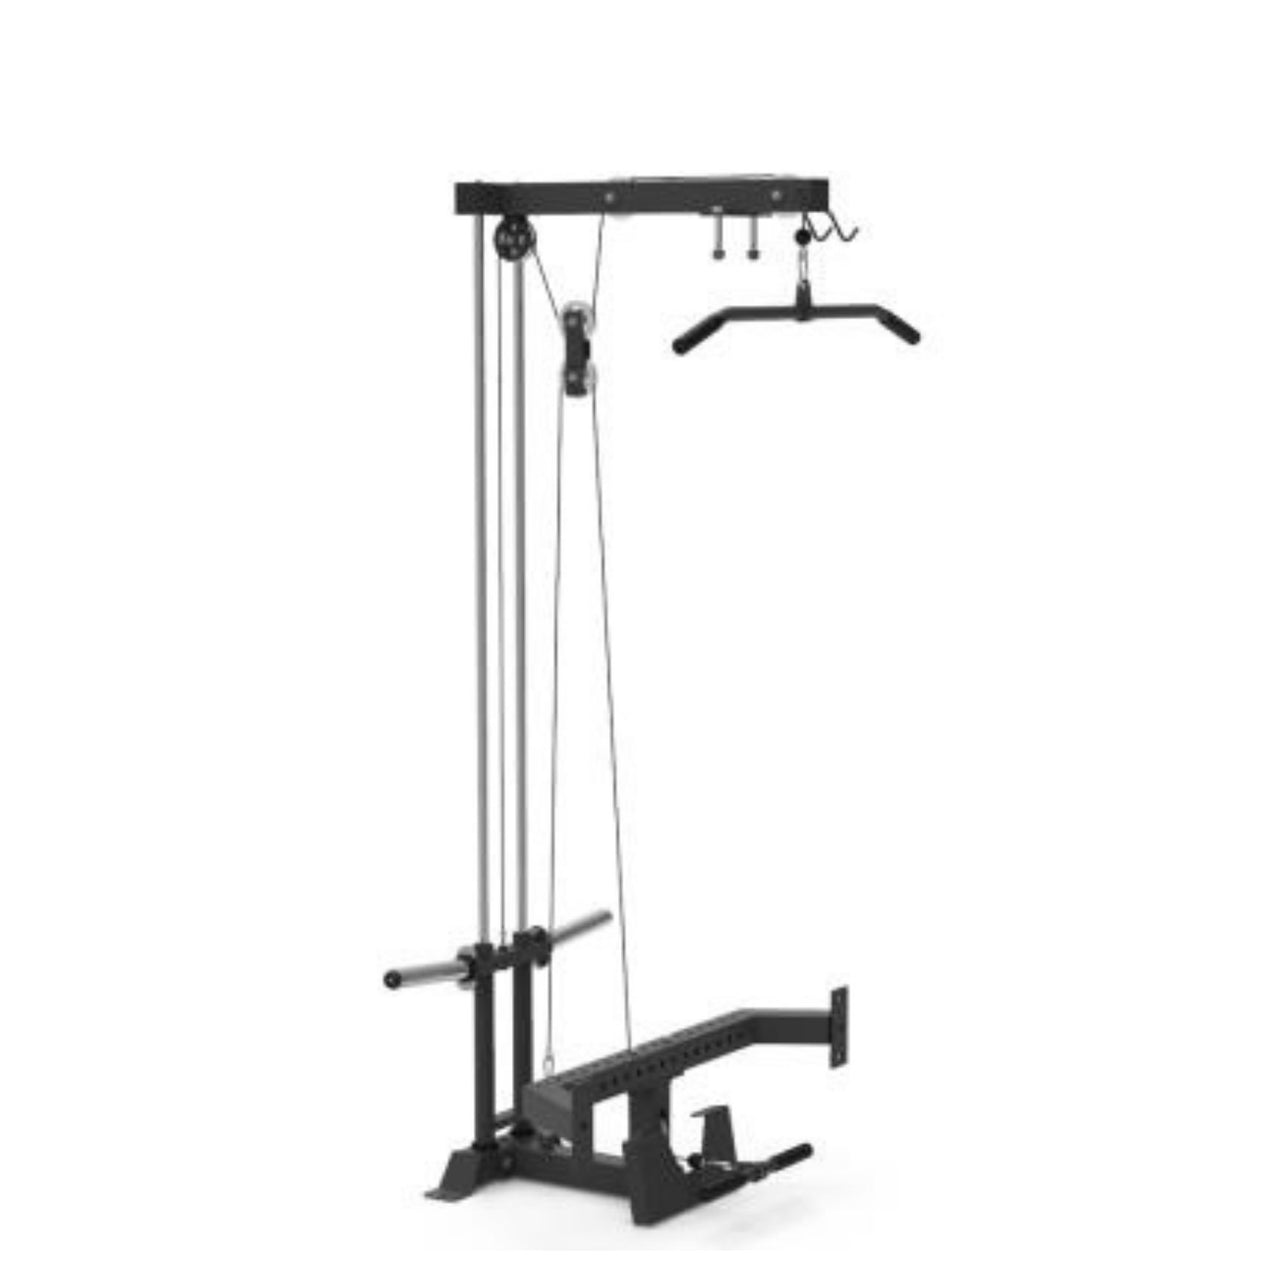 VULCAN Lat-Pulldown / Low Row Attachment for COMMERCIAL Power Rack | IN STOCK